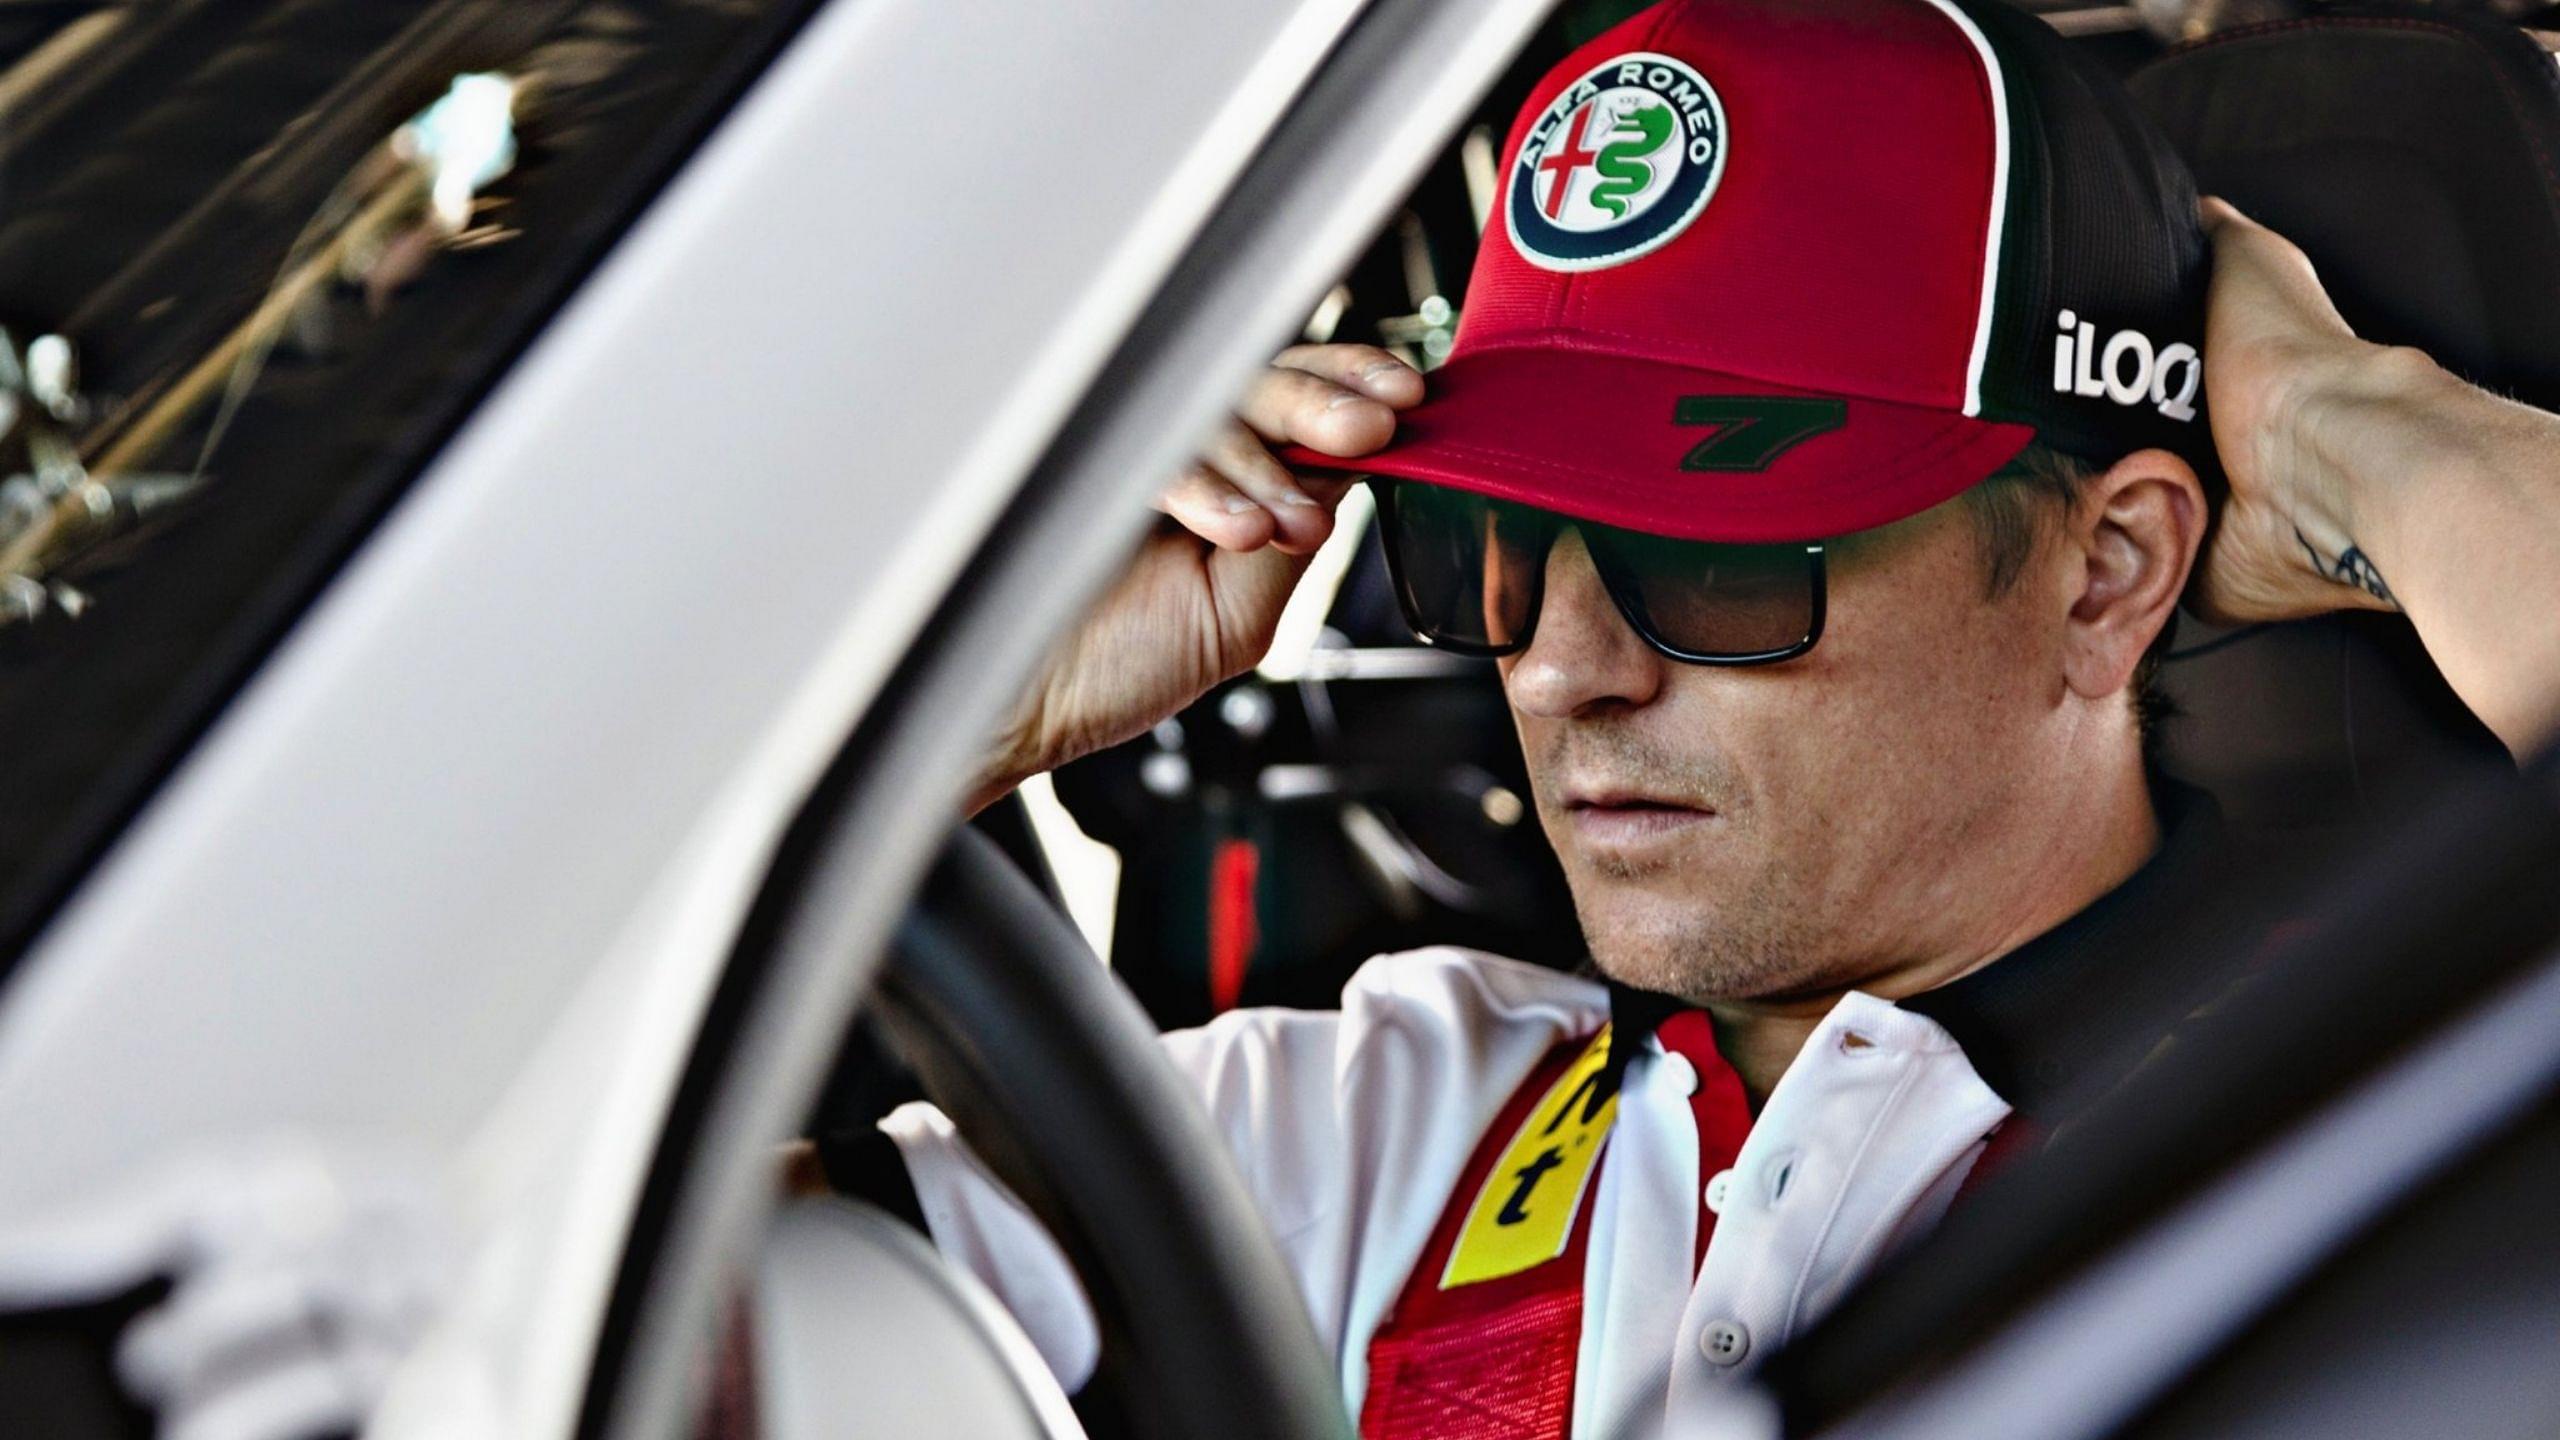 Kimi Raikkonen watches insane Portuguese GP first lap with his son, as fellow drivers rave about it